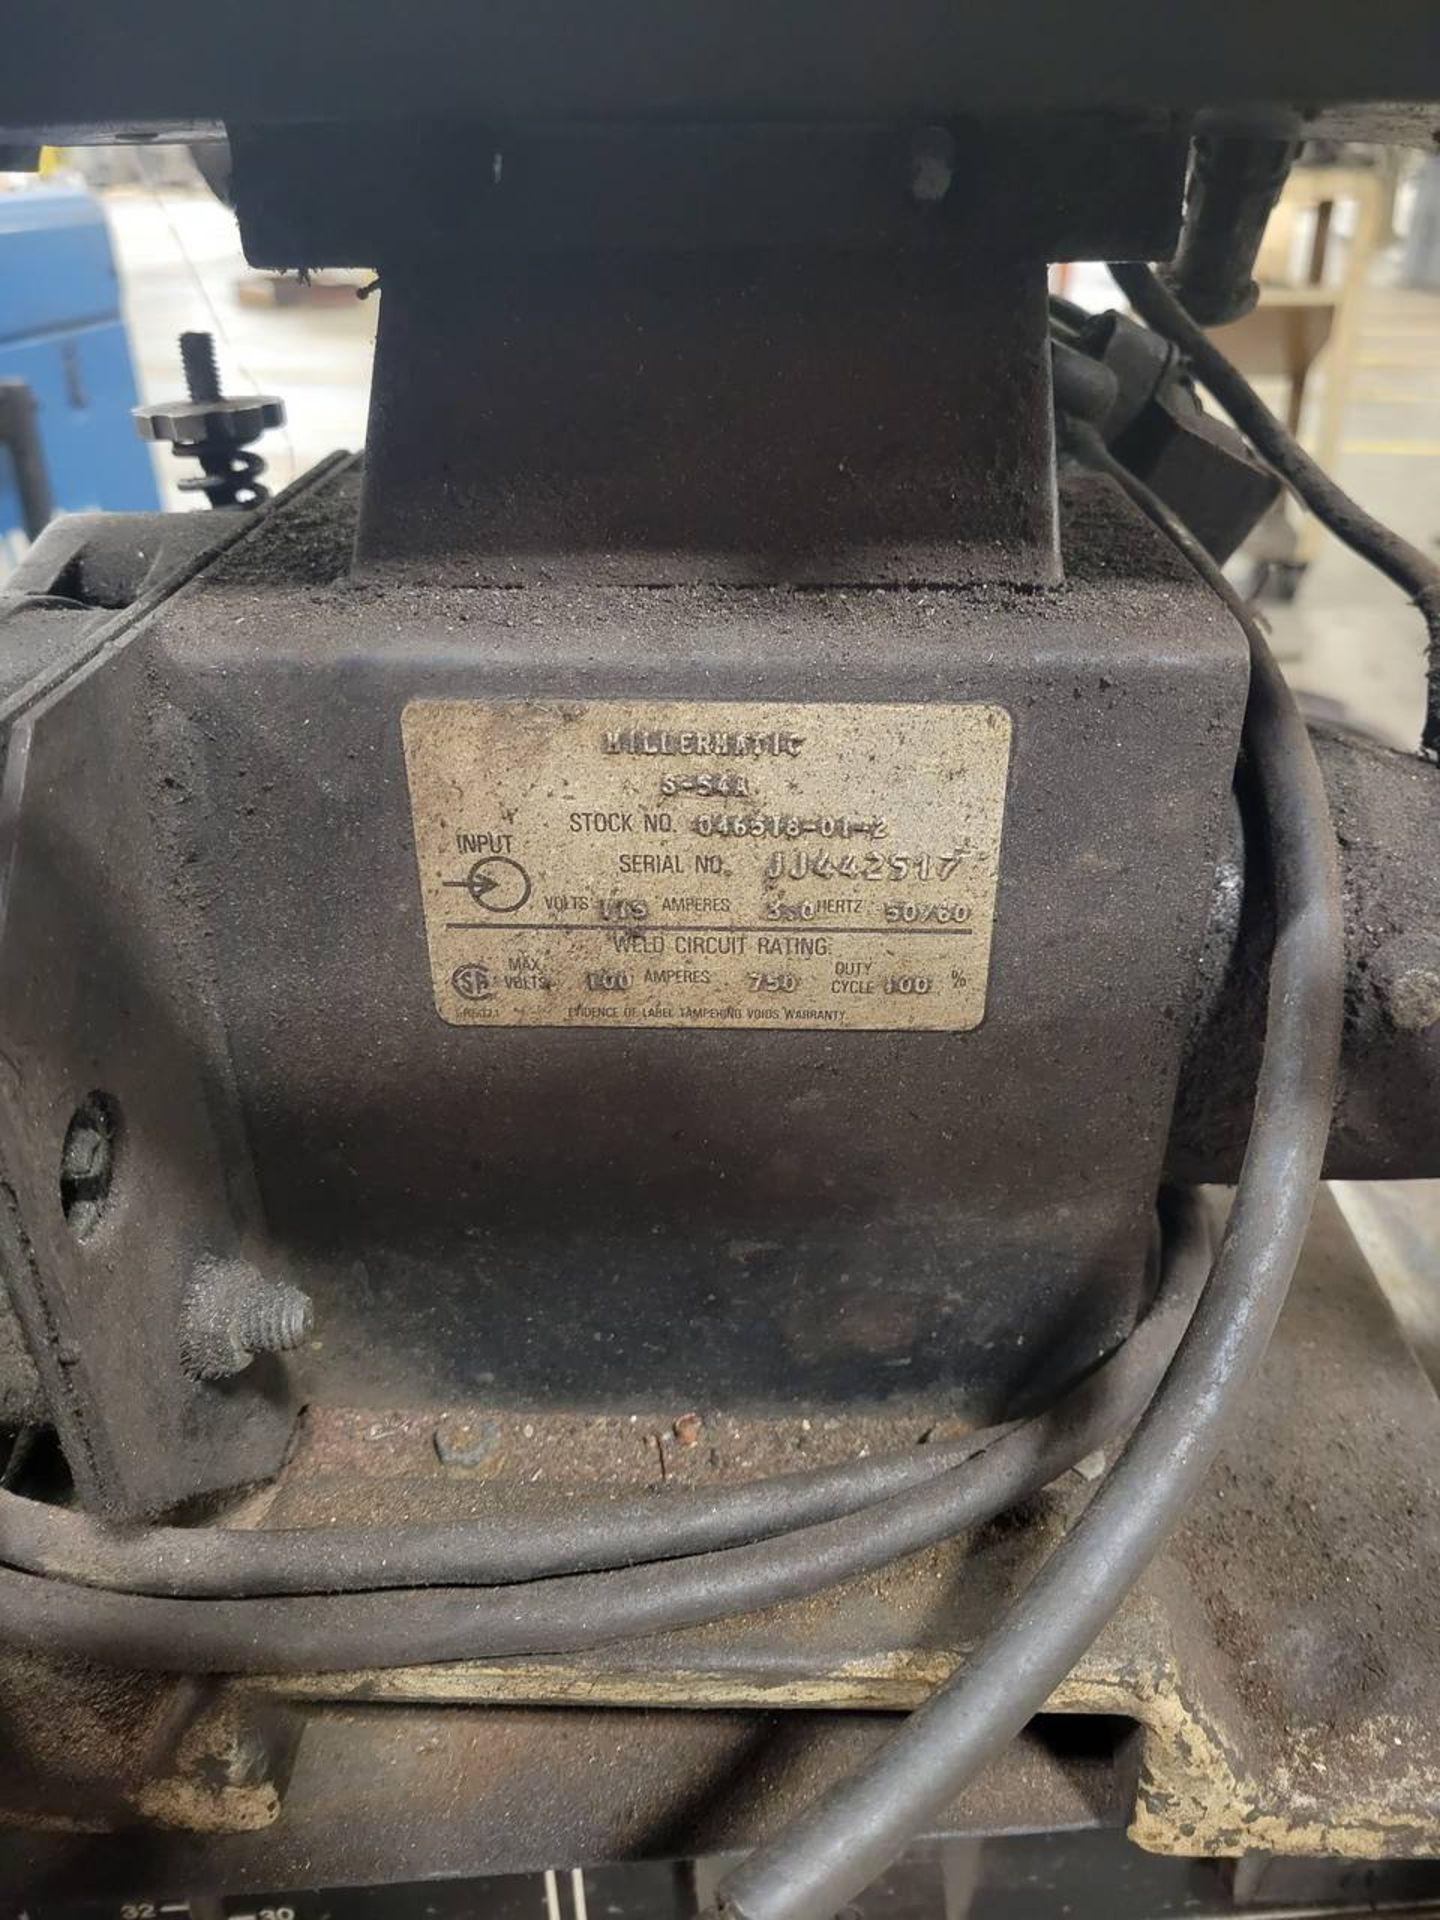 Miller CP-300 300 amp wire feed mig welder with Miller S-54a feeder - Image 5 of 7